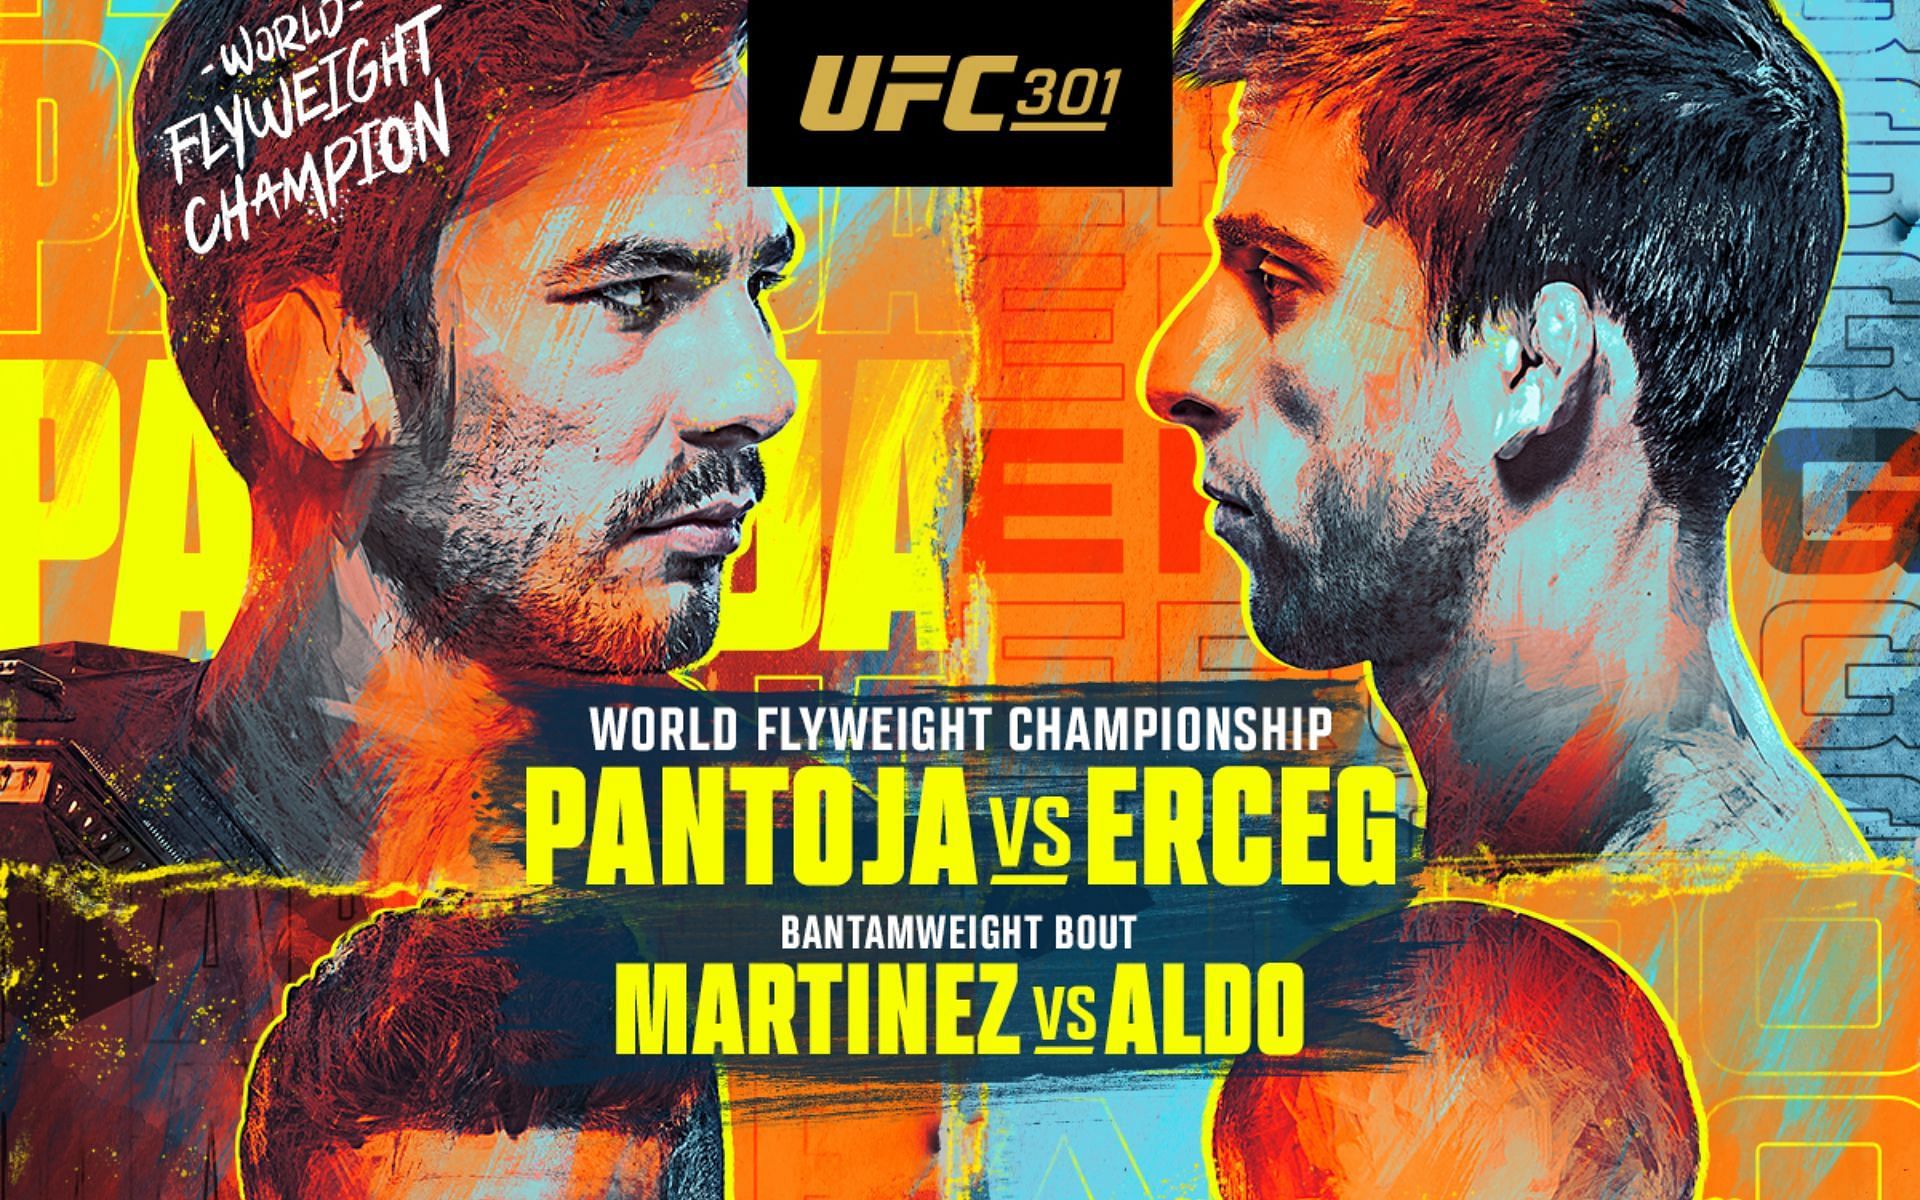 The UFC hits Rio de Janeiro this weekend for a pay-per-view offering